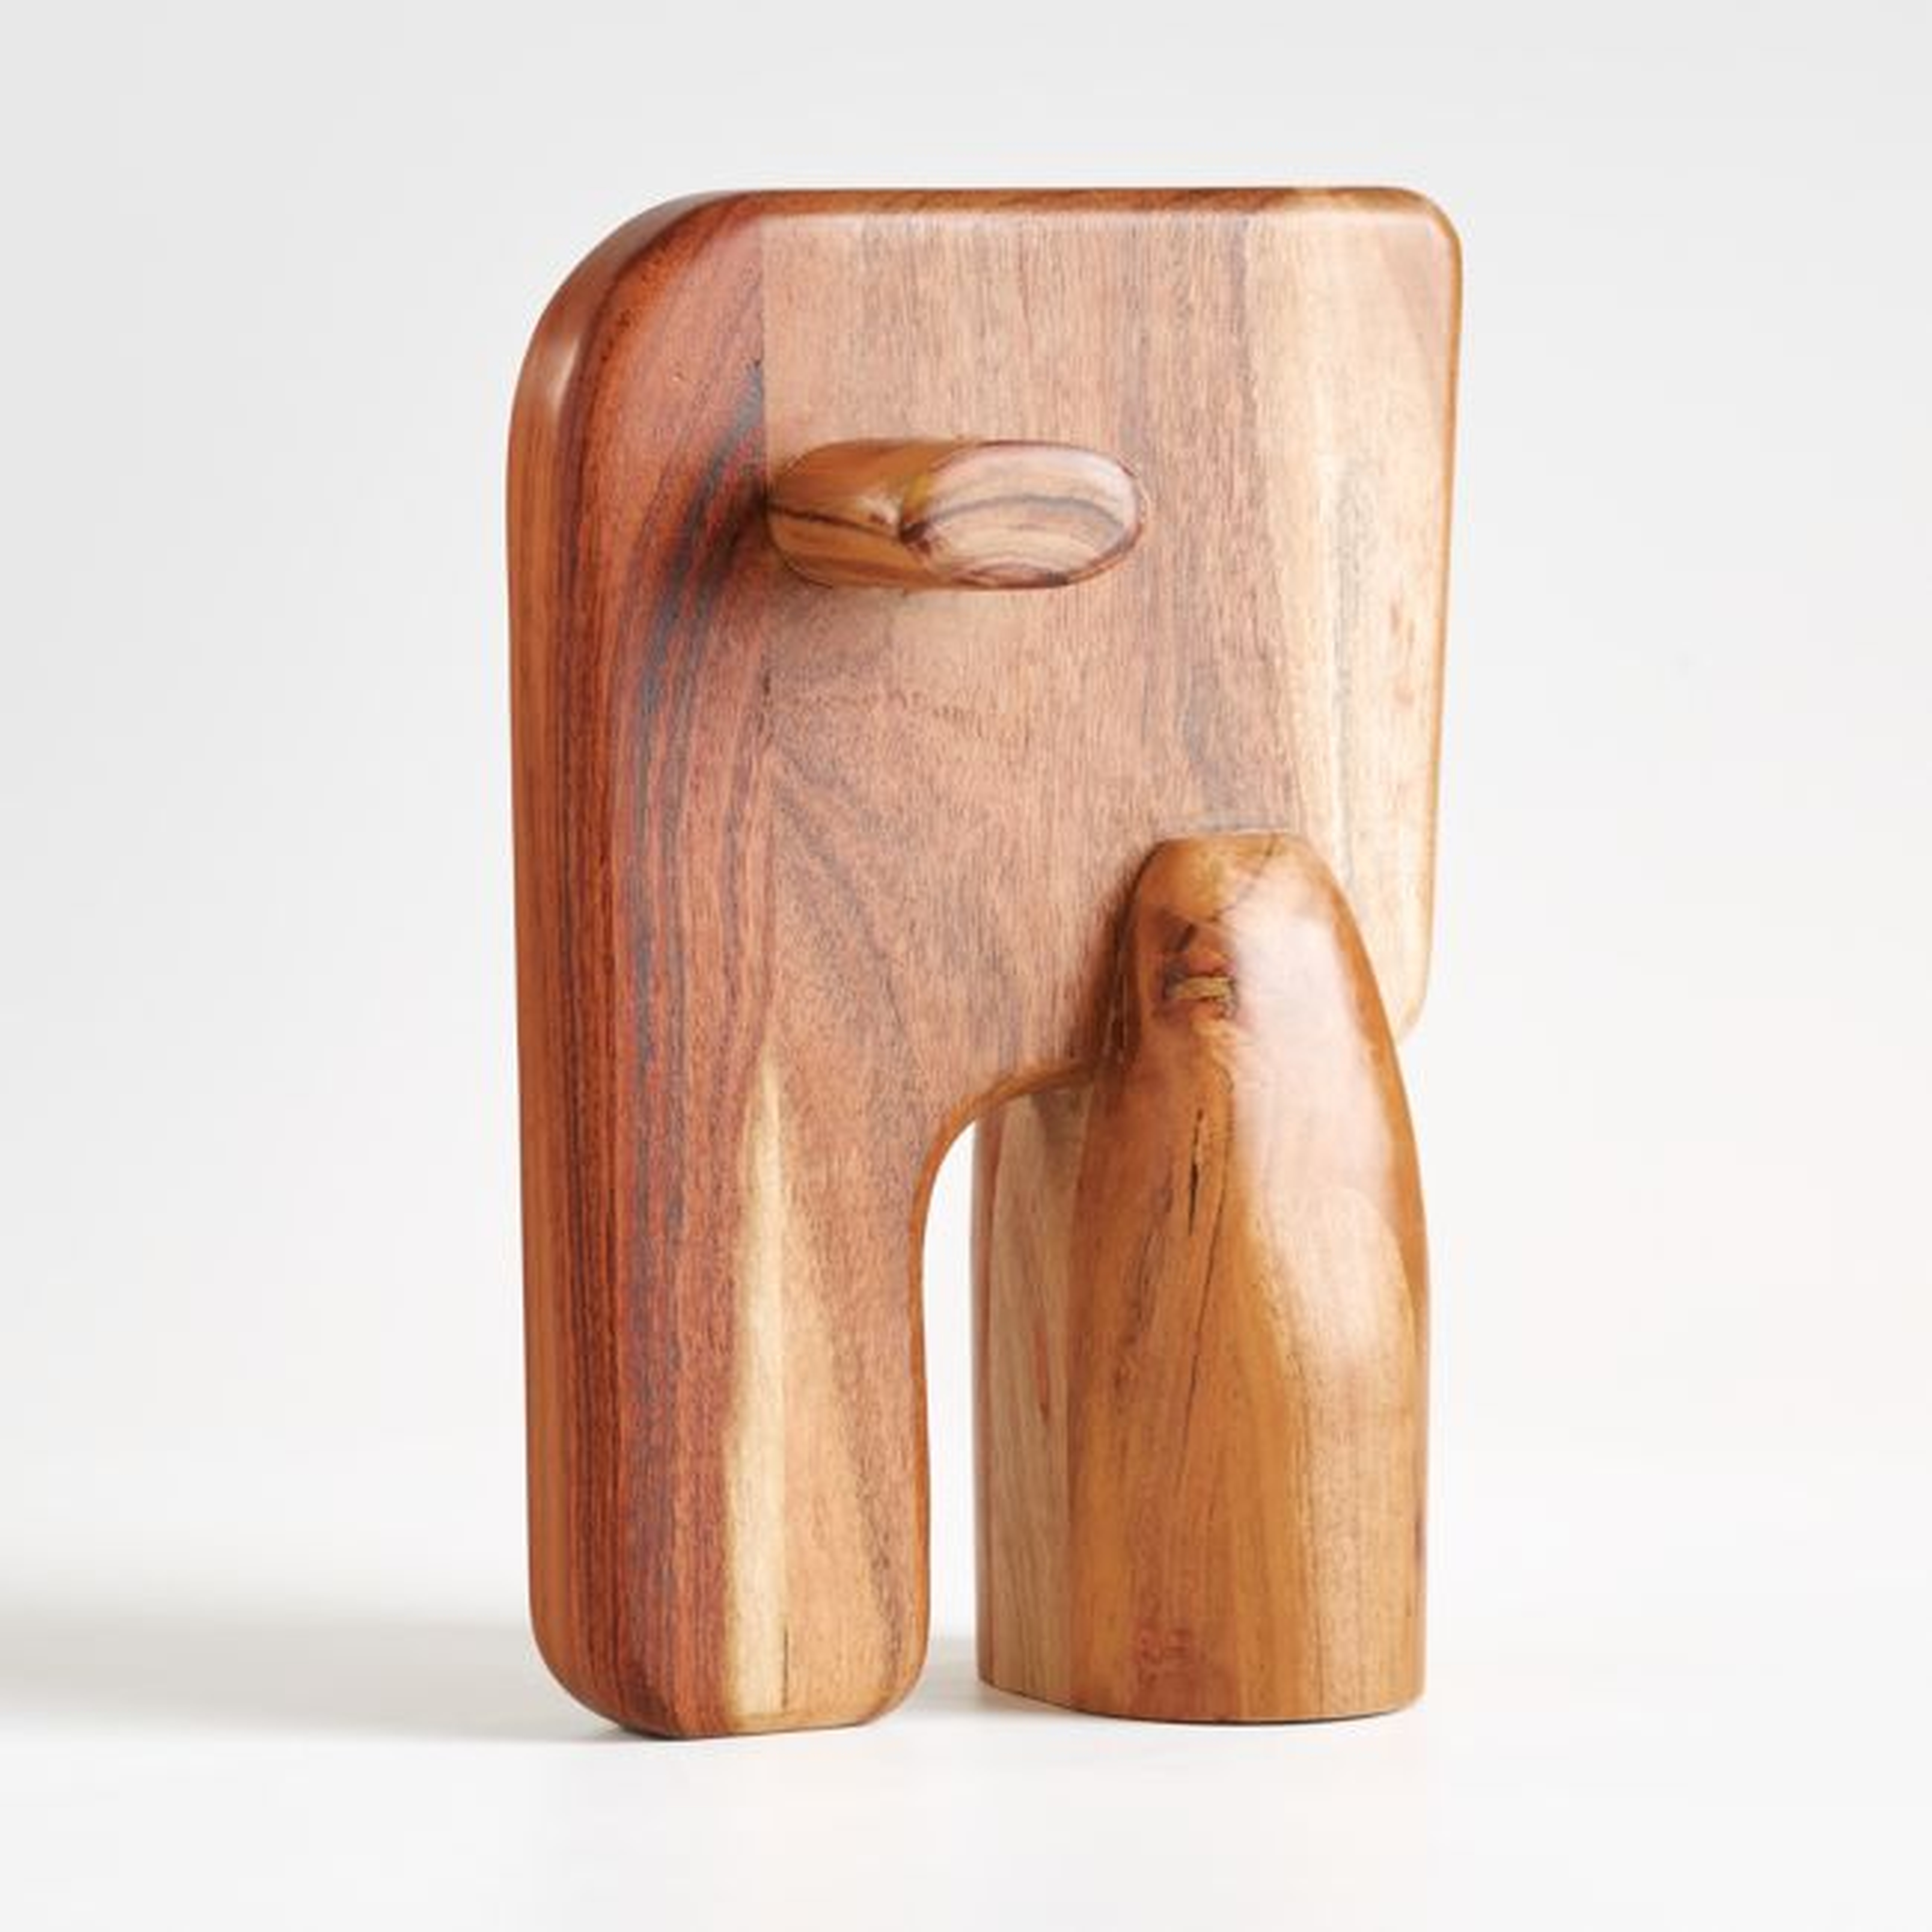 Abstract Wood Elephant Sculpture - Crate and Barrel